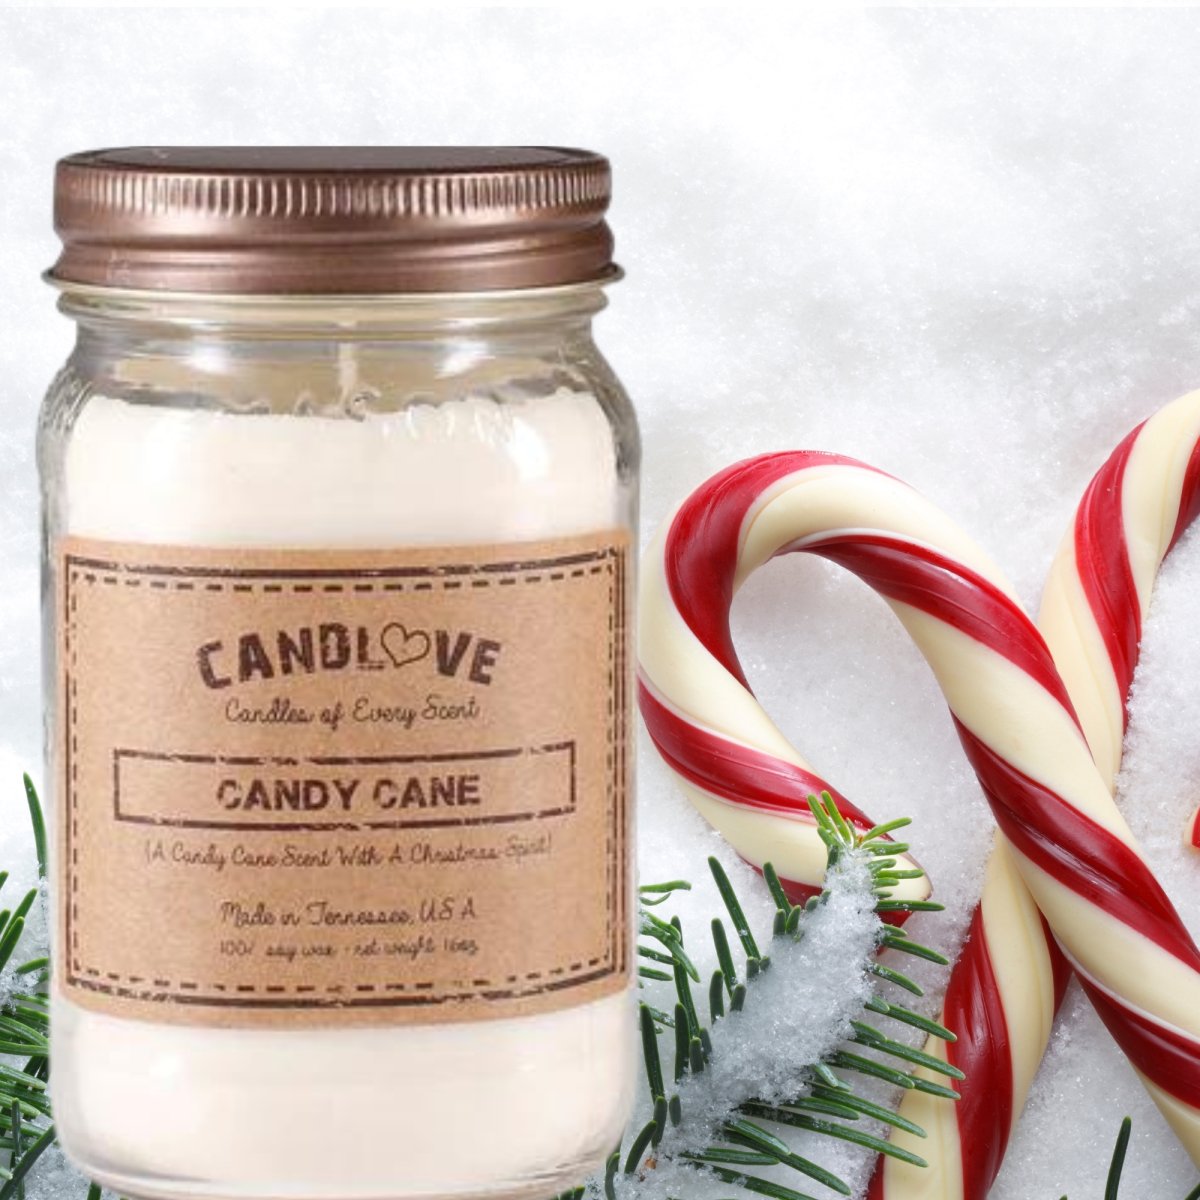 Picture of PPI SUPPLIES Candy-C-C Candlove Candy Cane Scented Candle - Non-Toxic 100% Soy Candle - Handmade & Hand Poured Long Burning Candle - Highly Scented All Natural Clean Burning Candle (16 OZ Mason Jar) Made in The USA